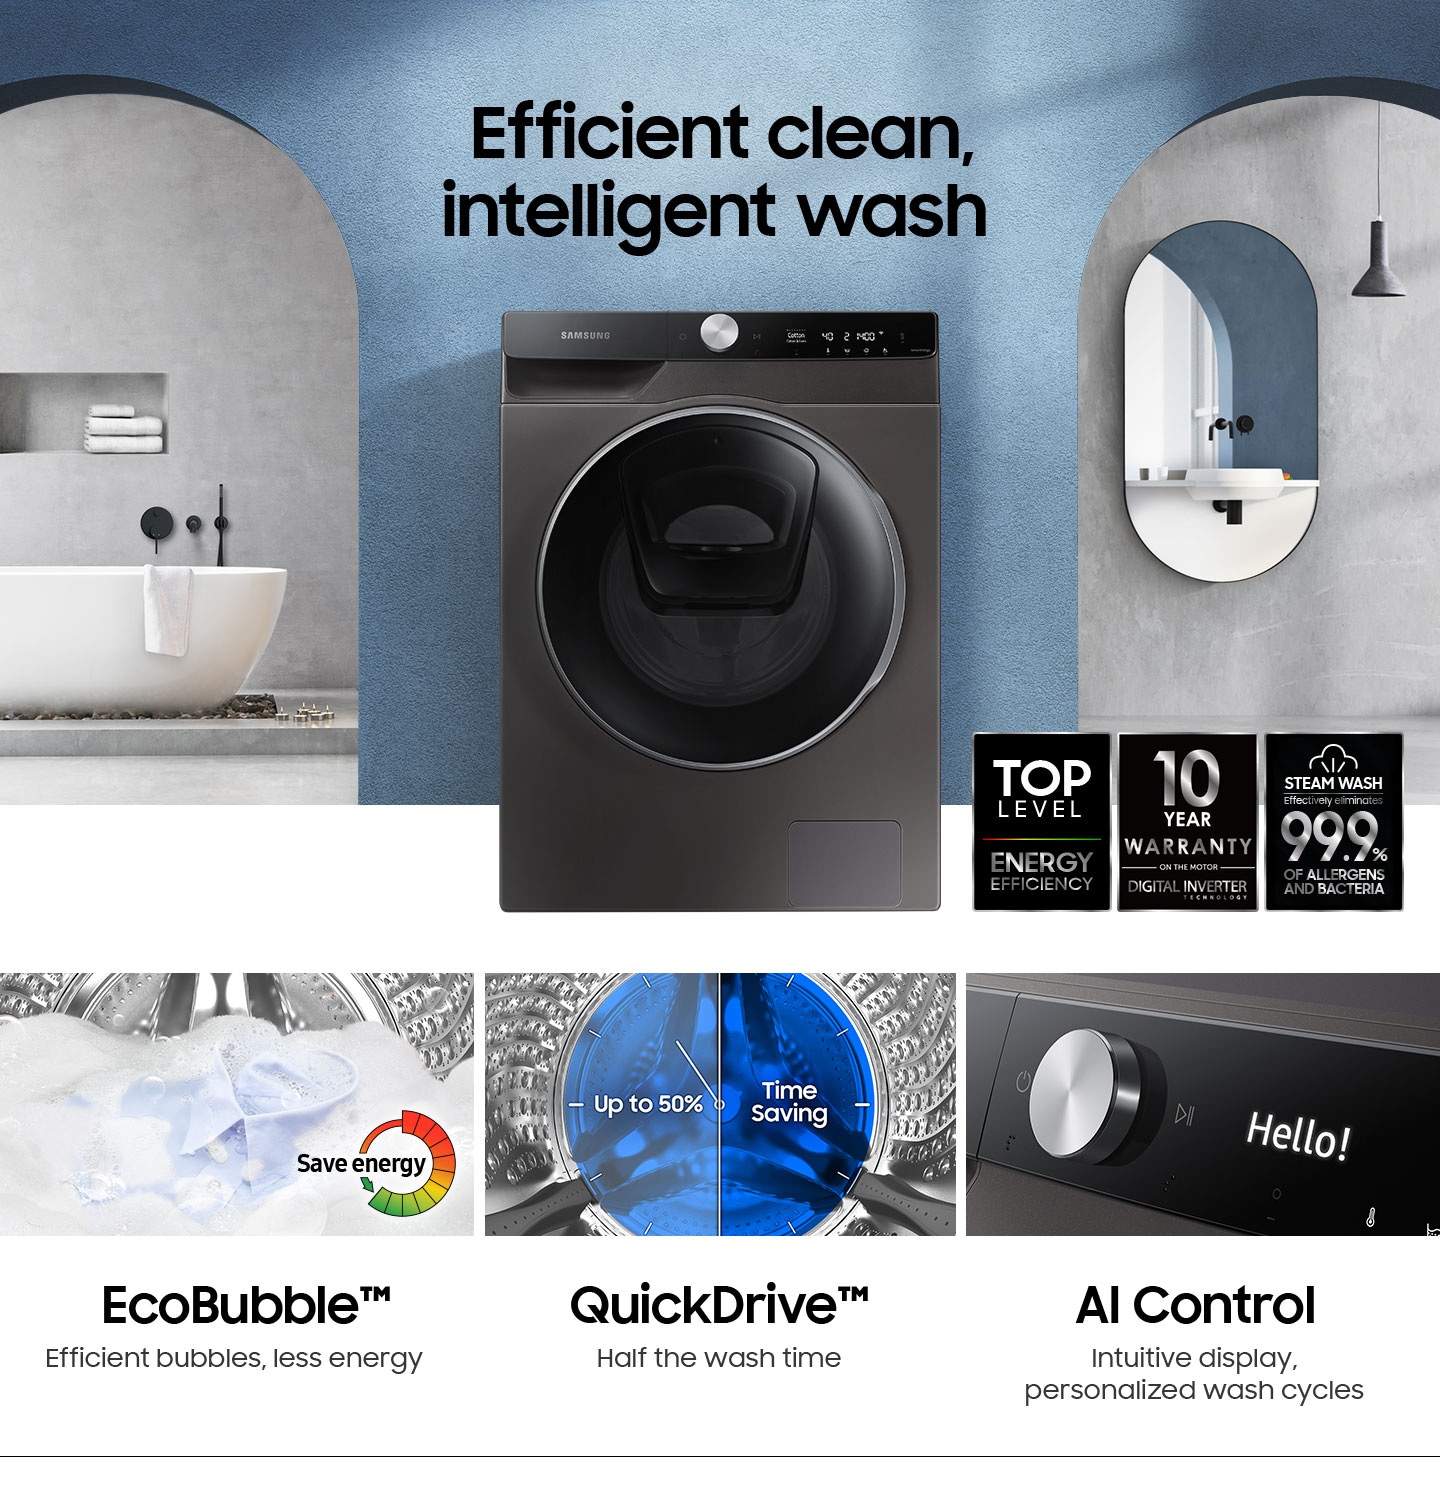 WW7800T features efficient clean, intelligent wash. It has Top level of energy efficiency, 10 year warranty on the Digital Inverter motor and effectively eliminates 99.9% of allergens and bacteria with steam wash. Eco Bubble saves energy as create bubble efficiently with less energy. Quick Drive is Time saving function which half the wash time up to 50%. AI control intuitively displays and personalizes wash cycles.